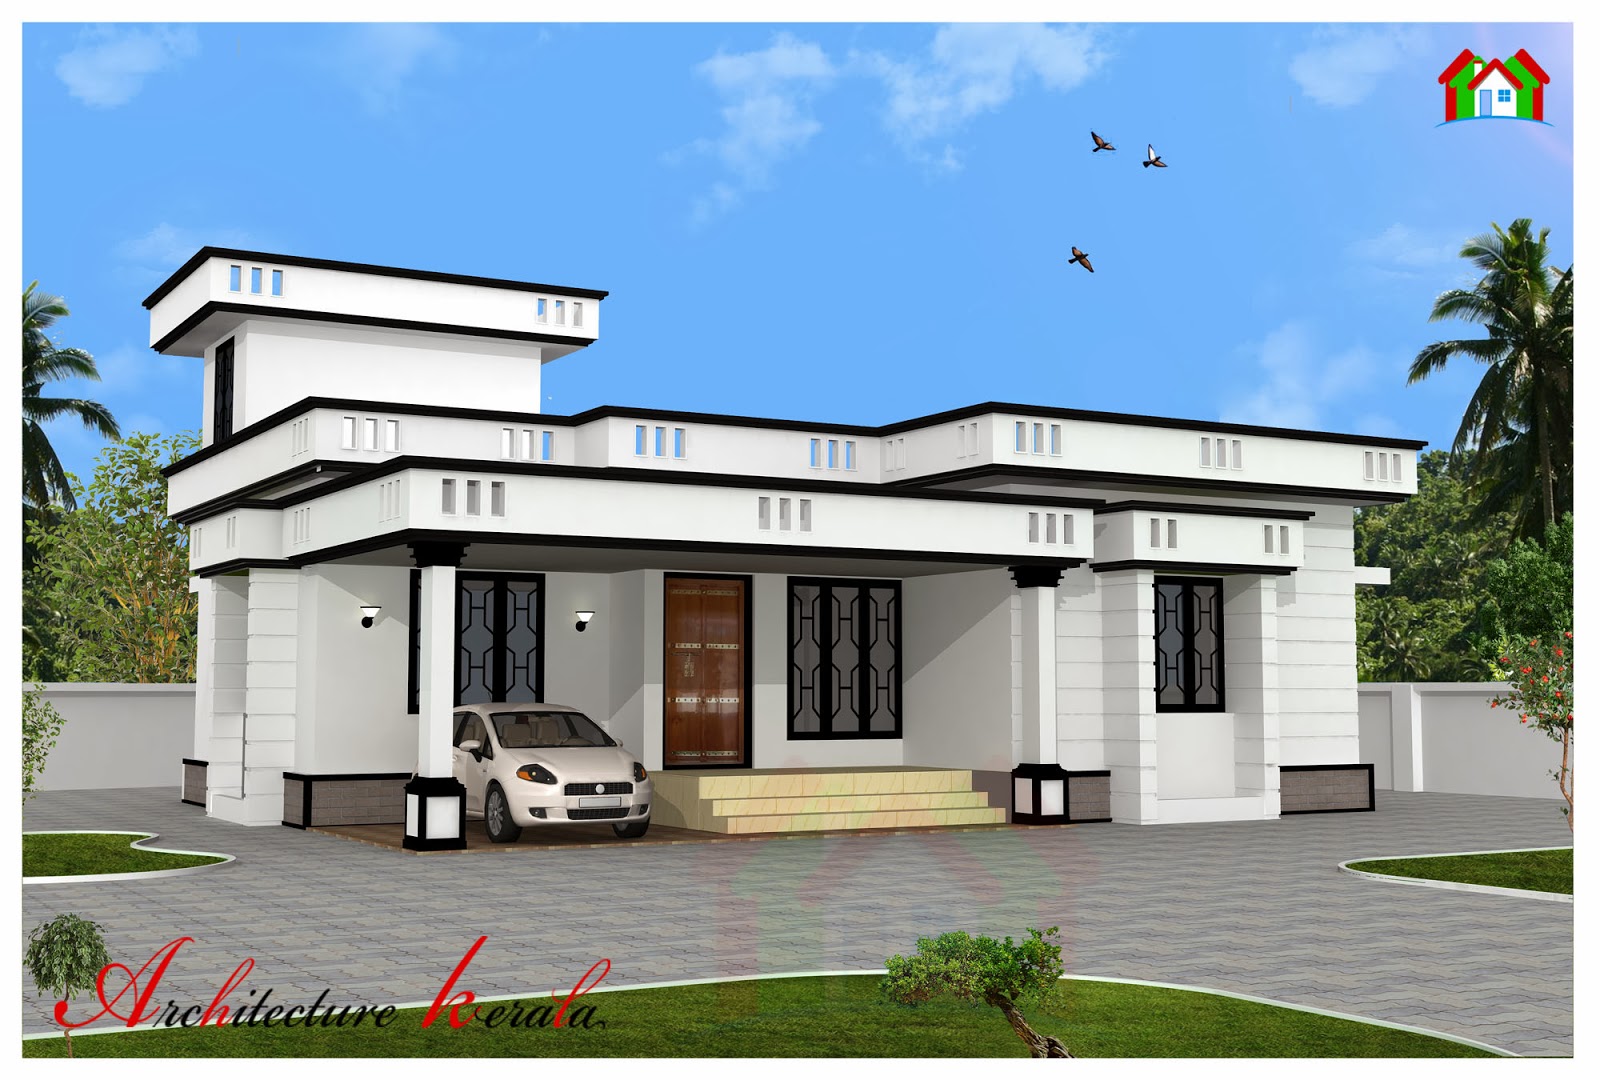  1200  SQUARE  FEET  TWO BEDROOM HOUSE  PLAN  AND ELEVATION 